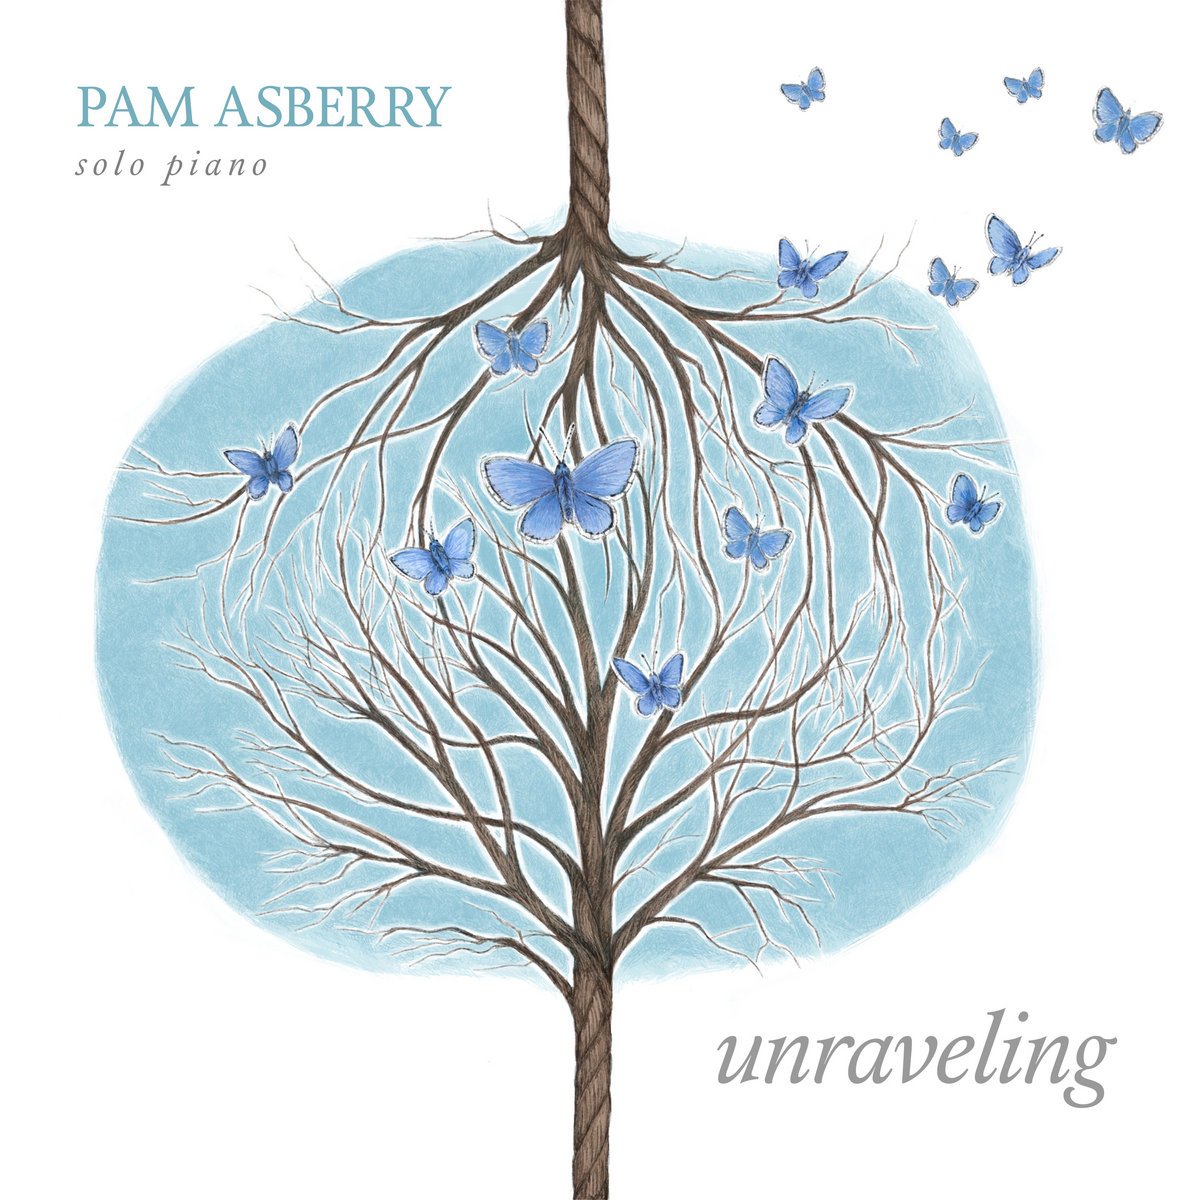 Pam Asberry